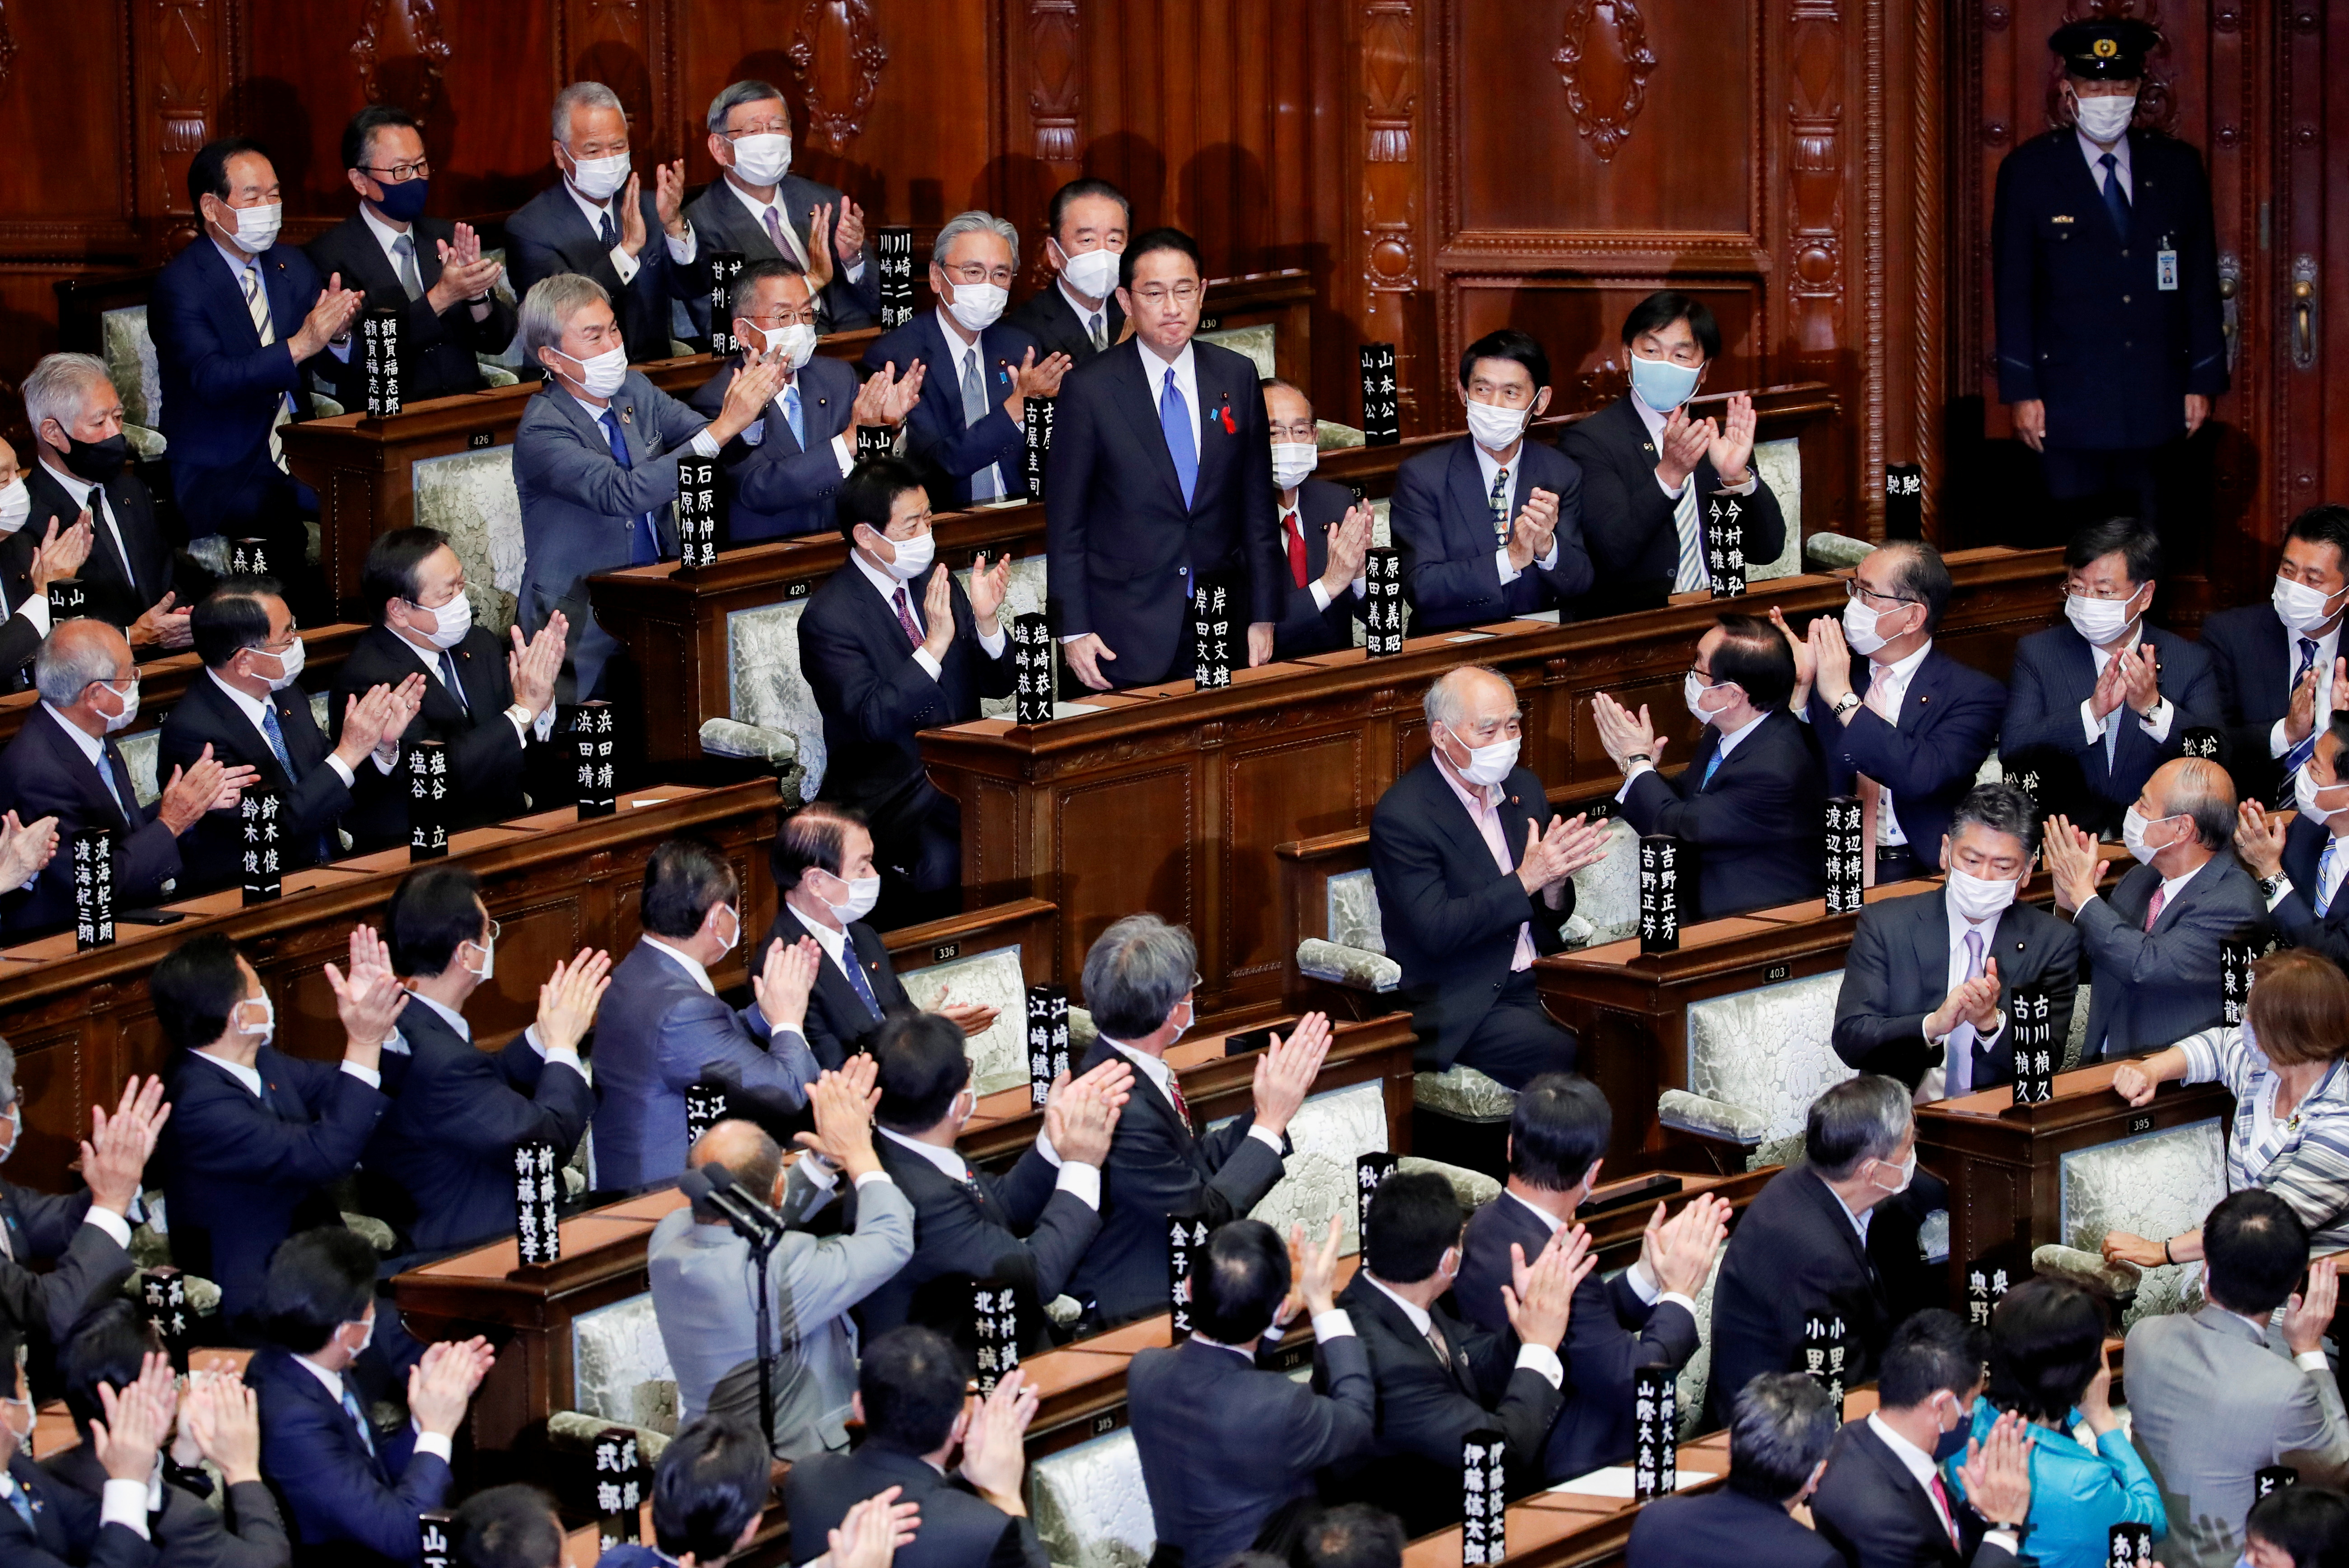 Japan's newly-elected Prime Minister Fumio Kishida is applauded after being chosen as the new prime minister, at the Lower House of Parliament in Tokyo